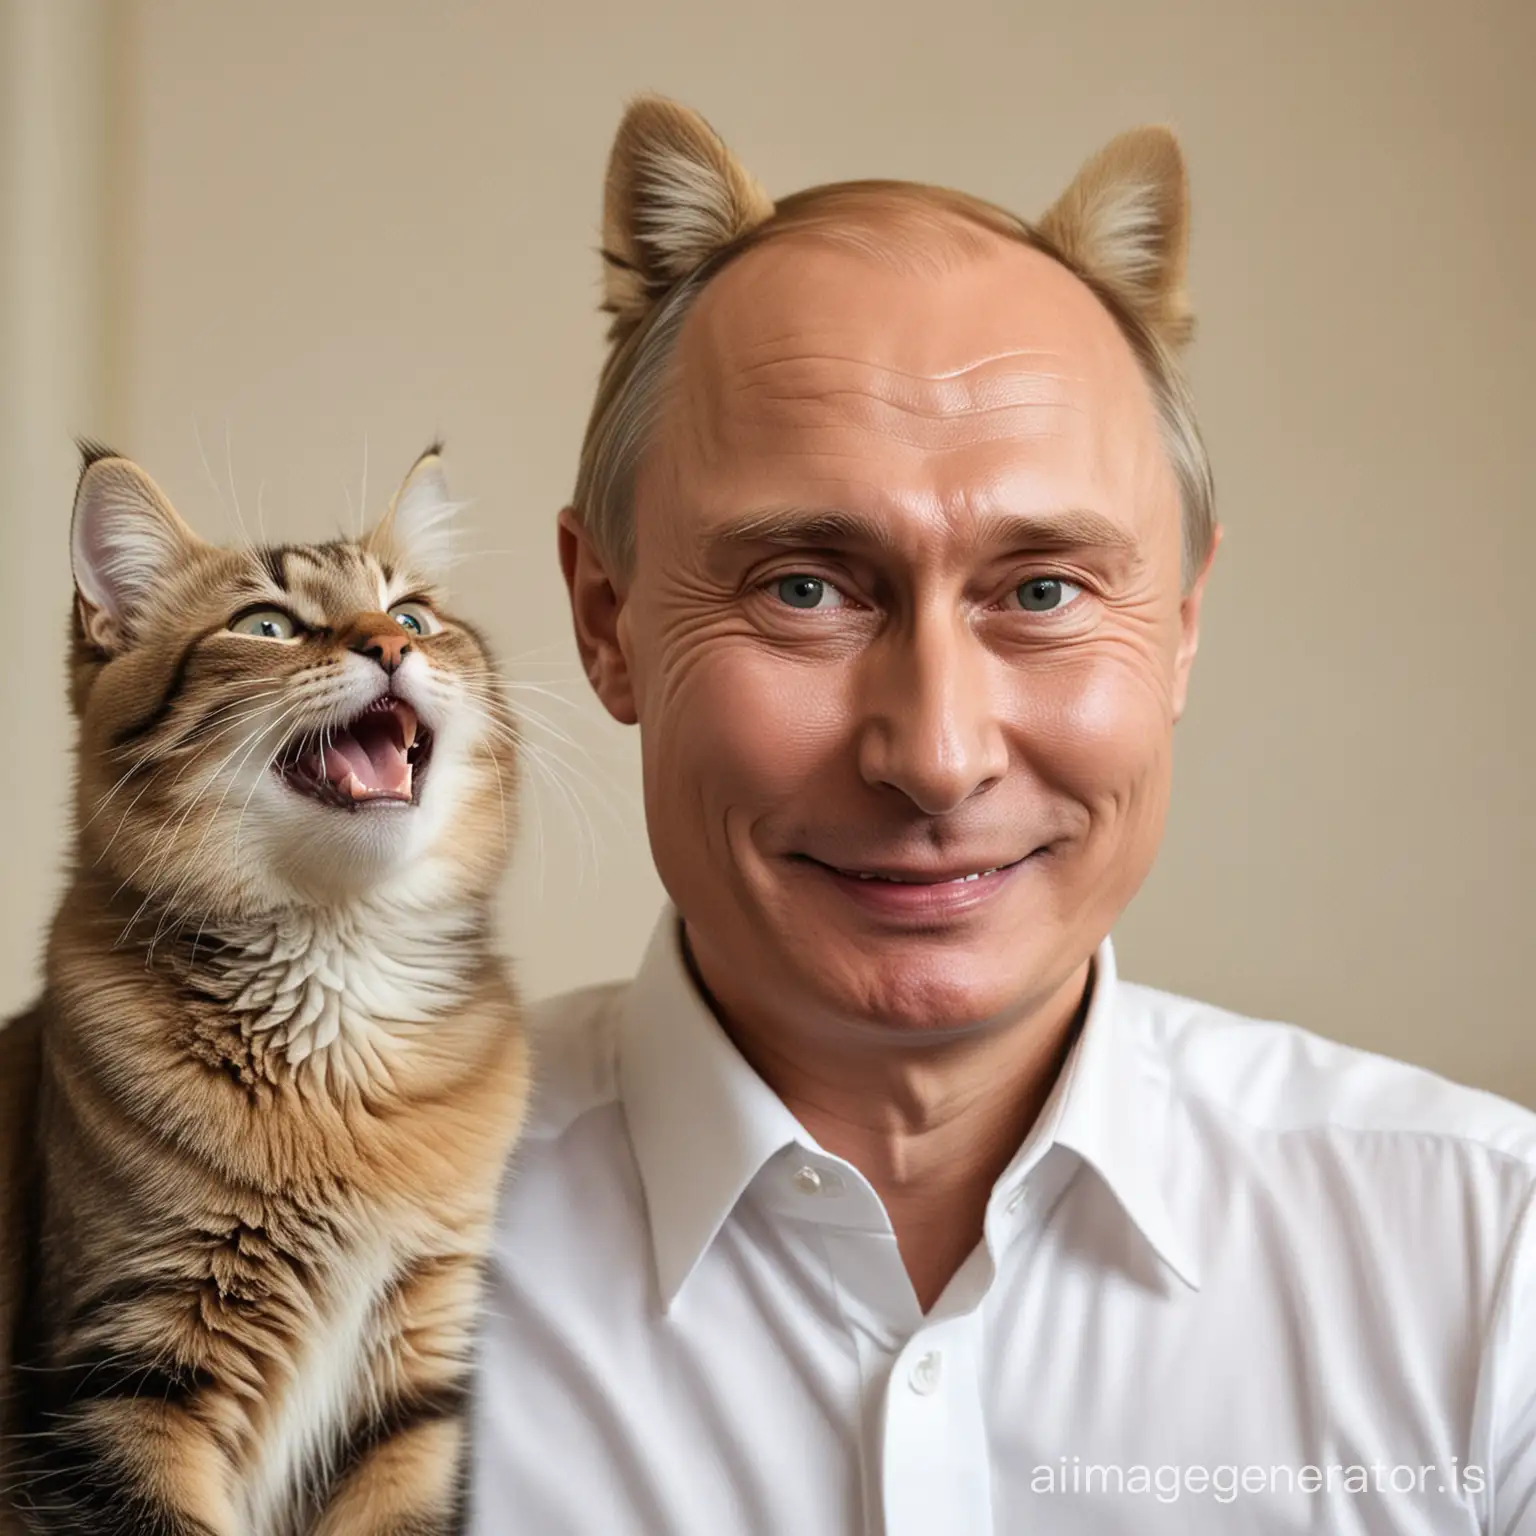 Putin with a with a very silly stupid grin on his face. He is looking up a cat that is sitting on his head